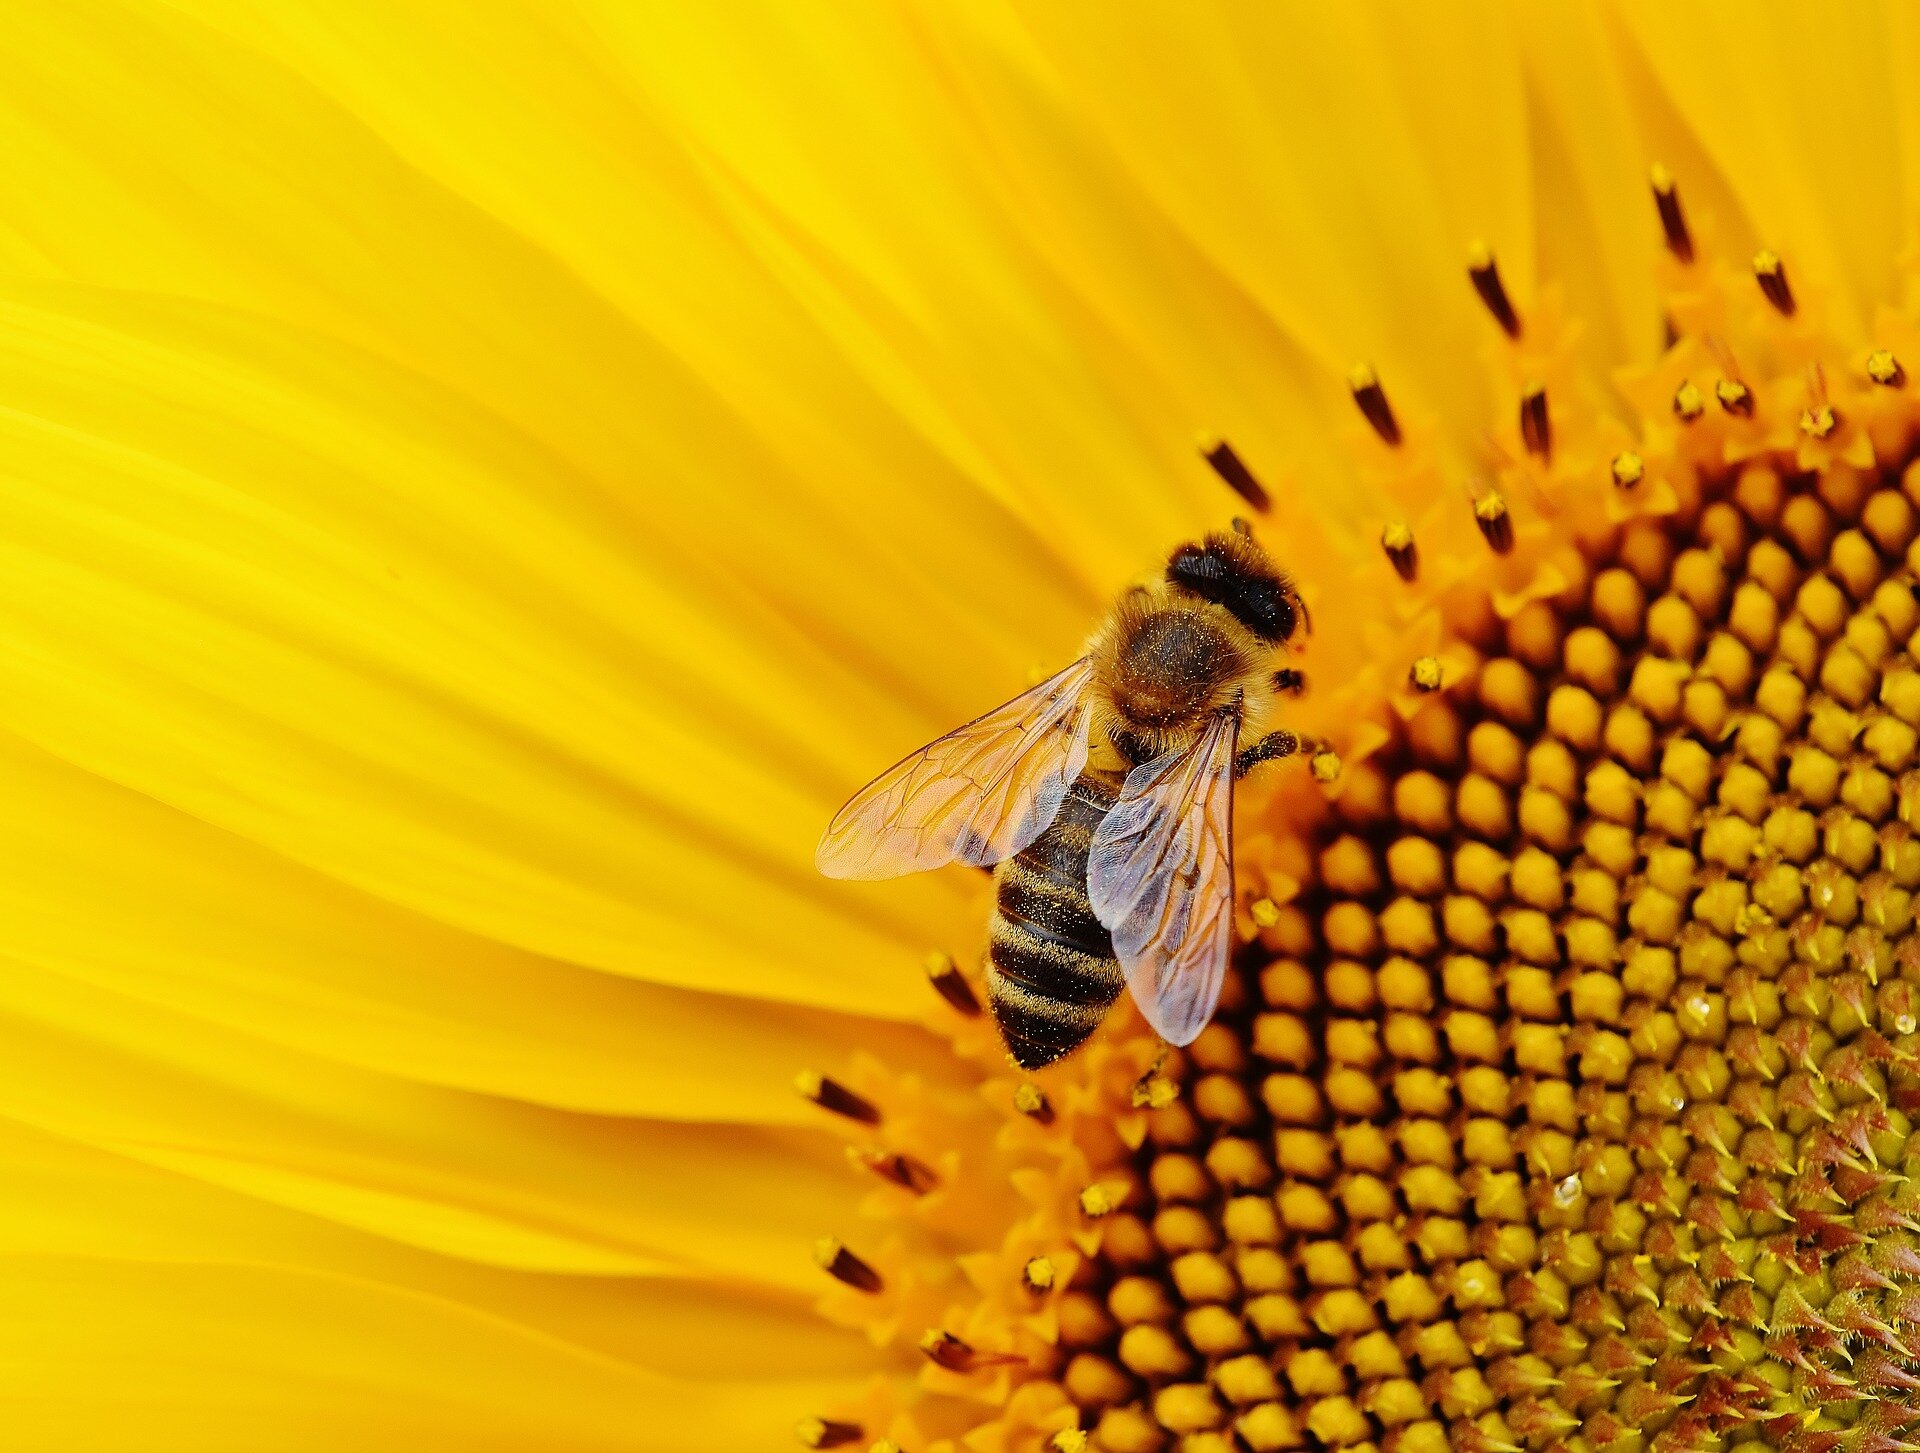 Modern pesticides damage the brain of bees so they can't move in a straight line